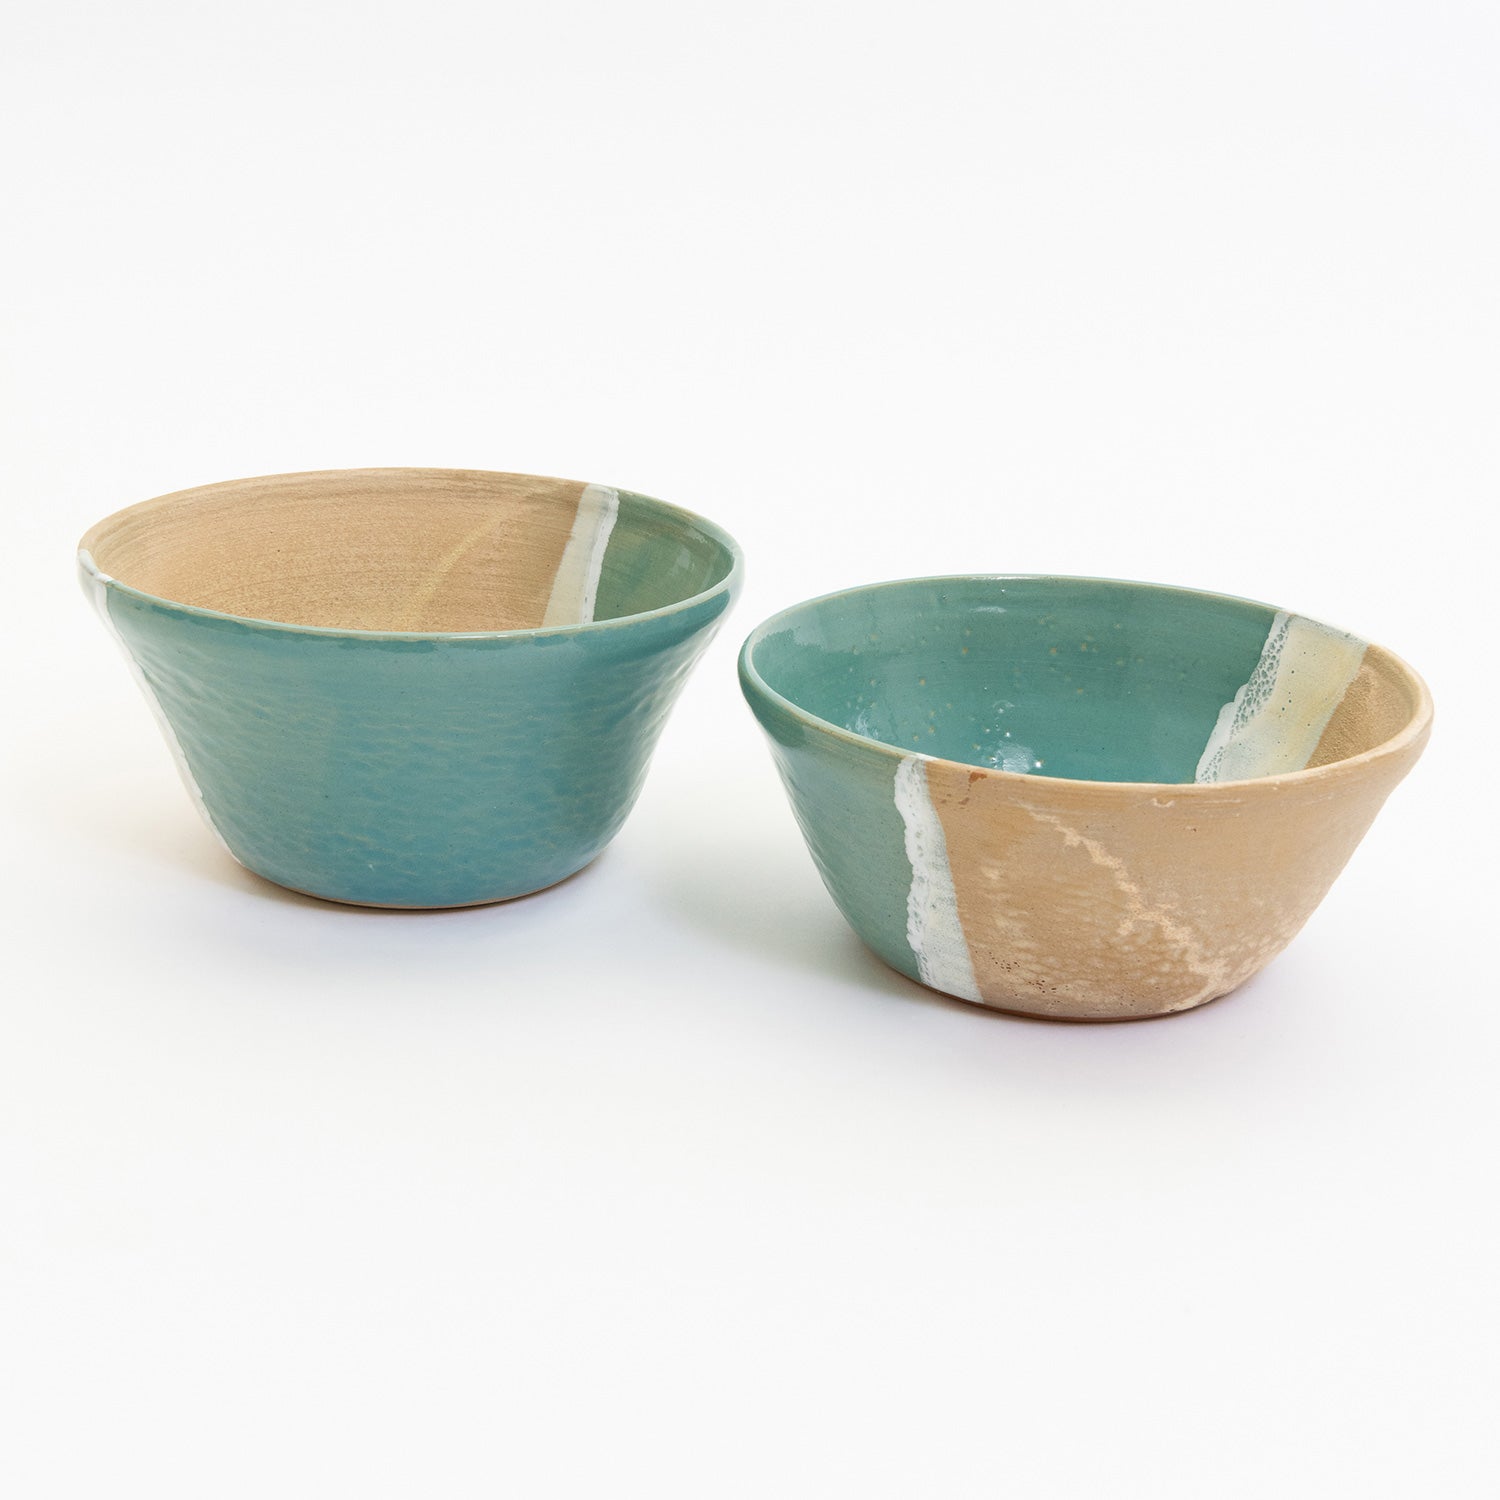 Two bowls pictured on a white background. Each bowl has an ocean shoreline design, with the sea, a wave, and the sand across it.